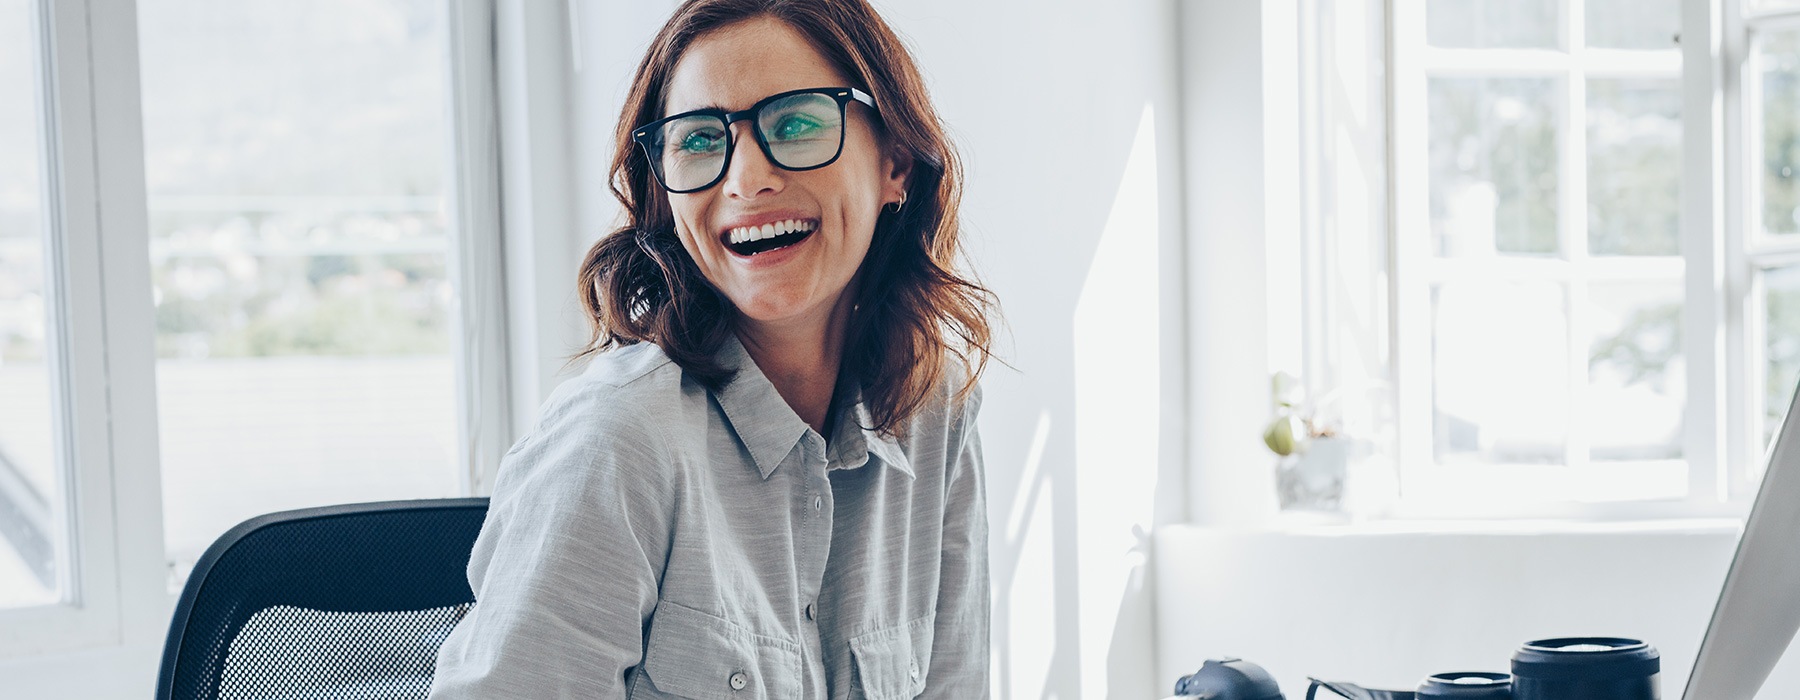 lifestyle image of a woman laughing and working